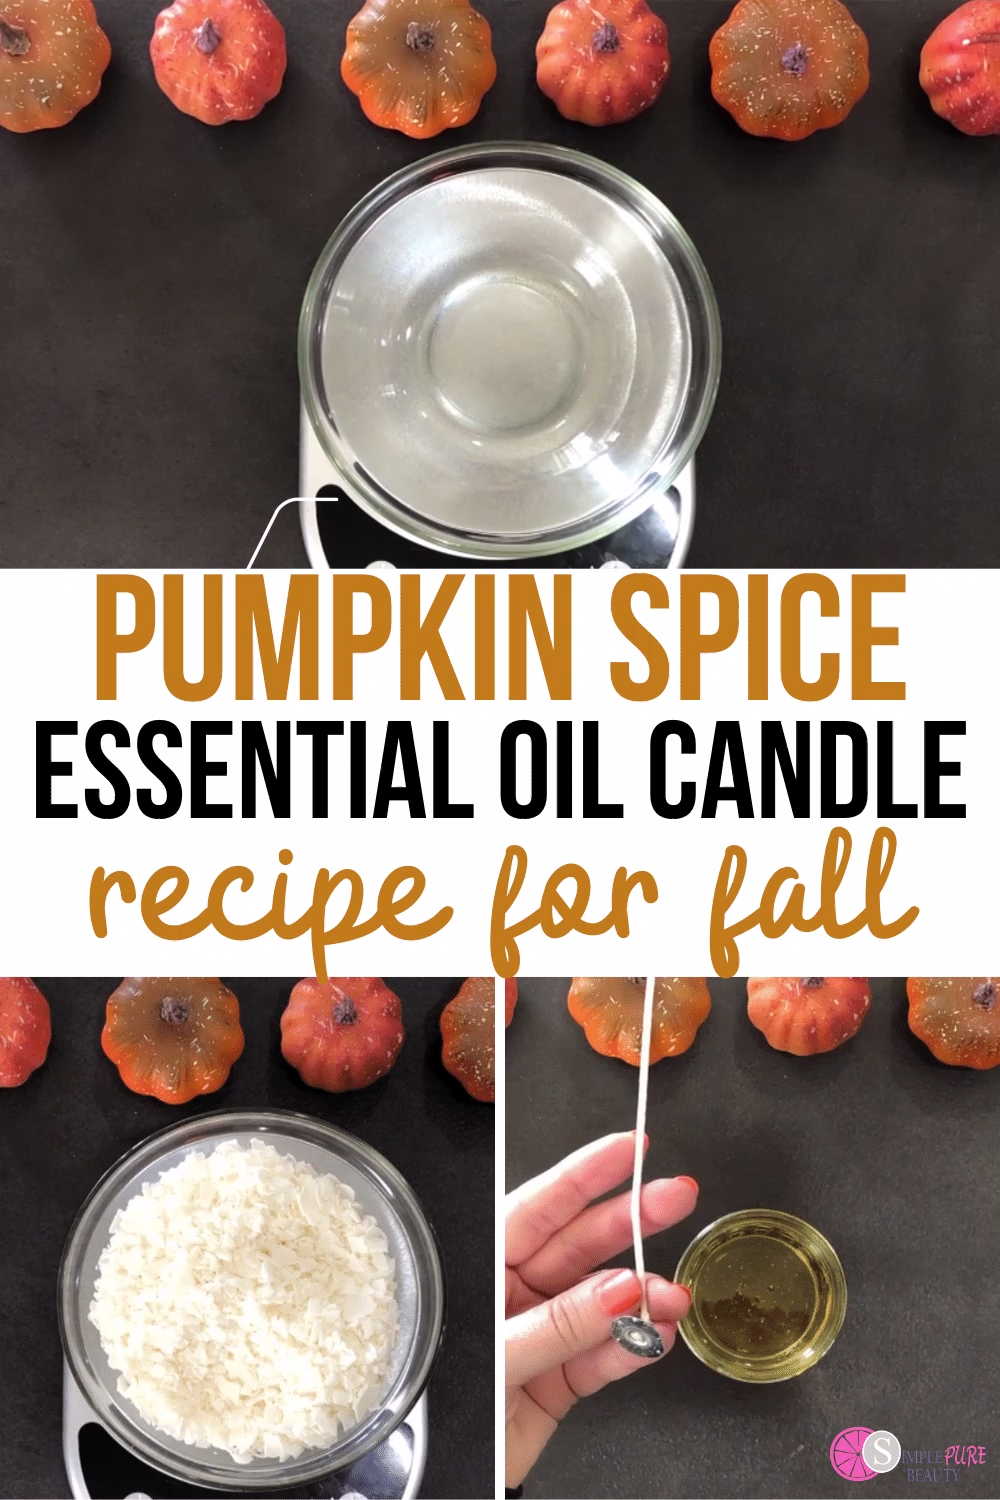 Pumpkin Spice Essential Oil Candle Recipe for FALL - Pumpkin Spice Essential Oil Candle Recipe for FALL -   15 diy Candles step by step ideas